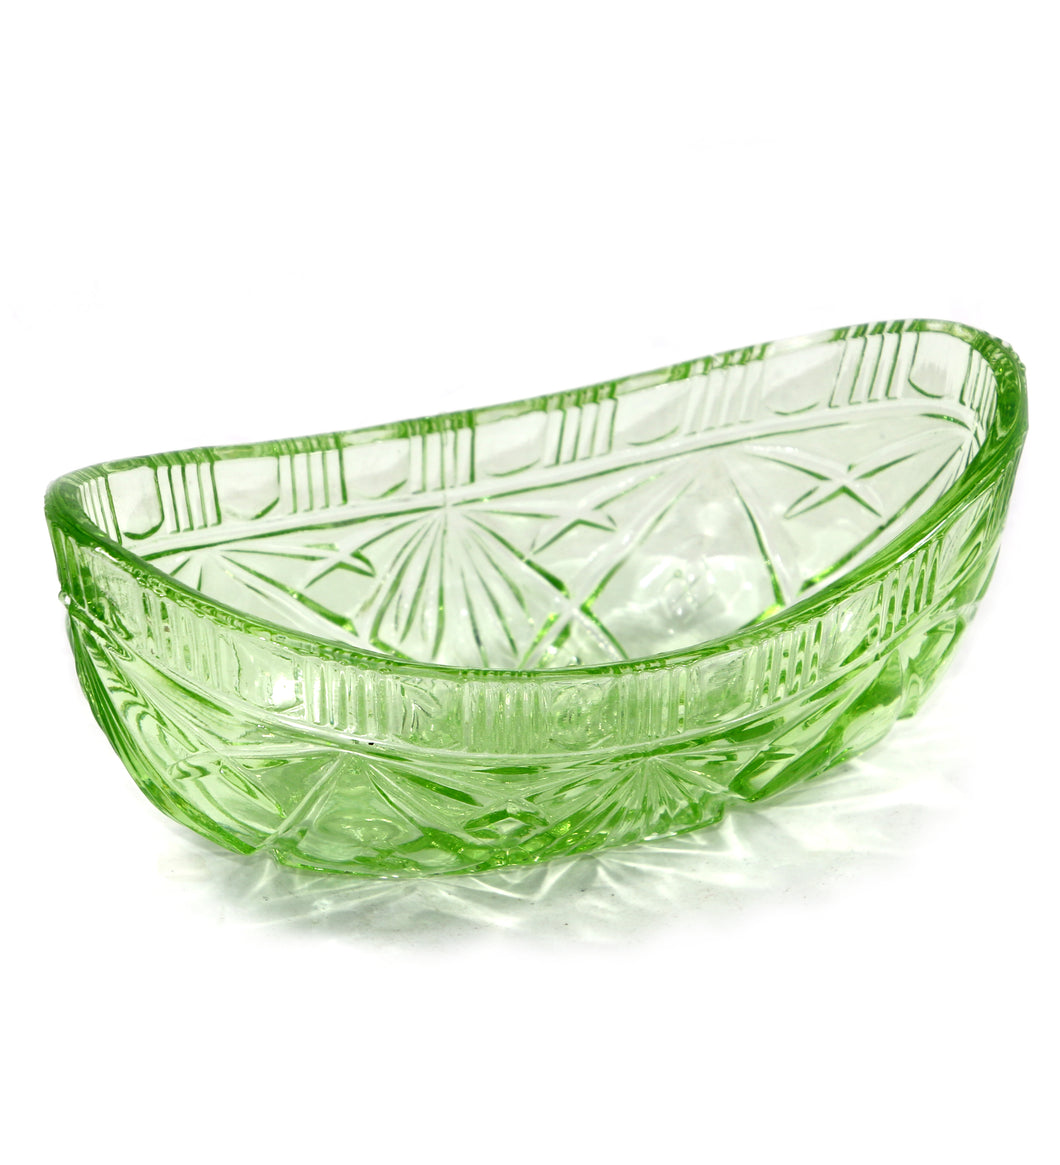 Vintage heavy clear green hobstar solid depression glass canoe bowl